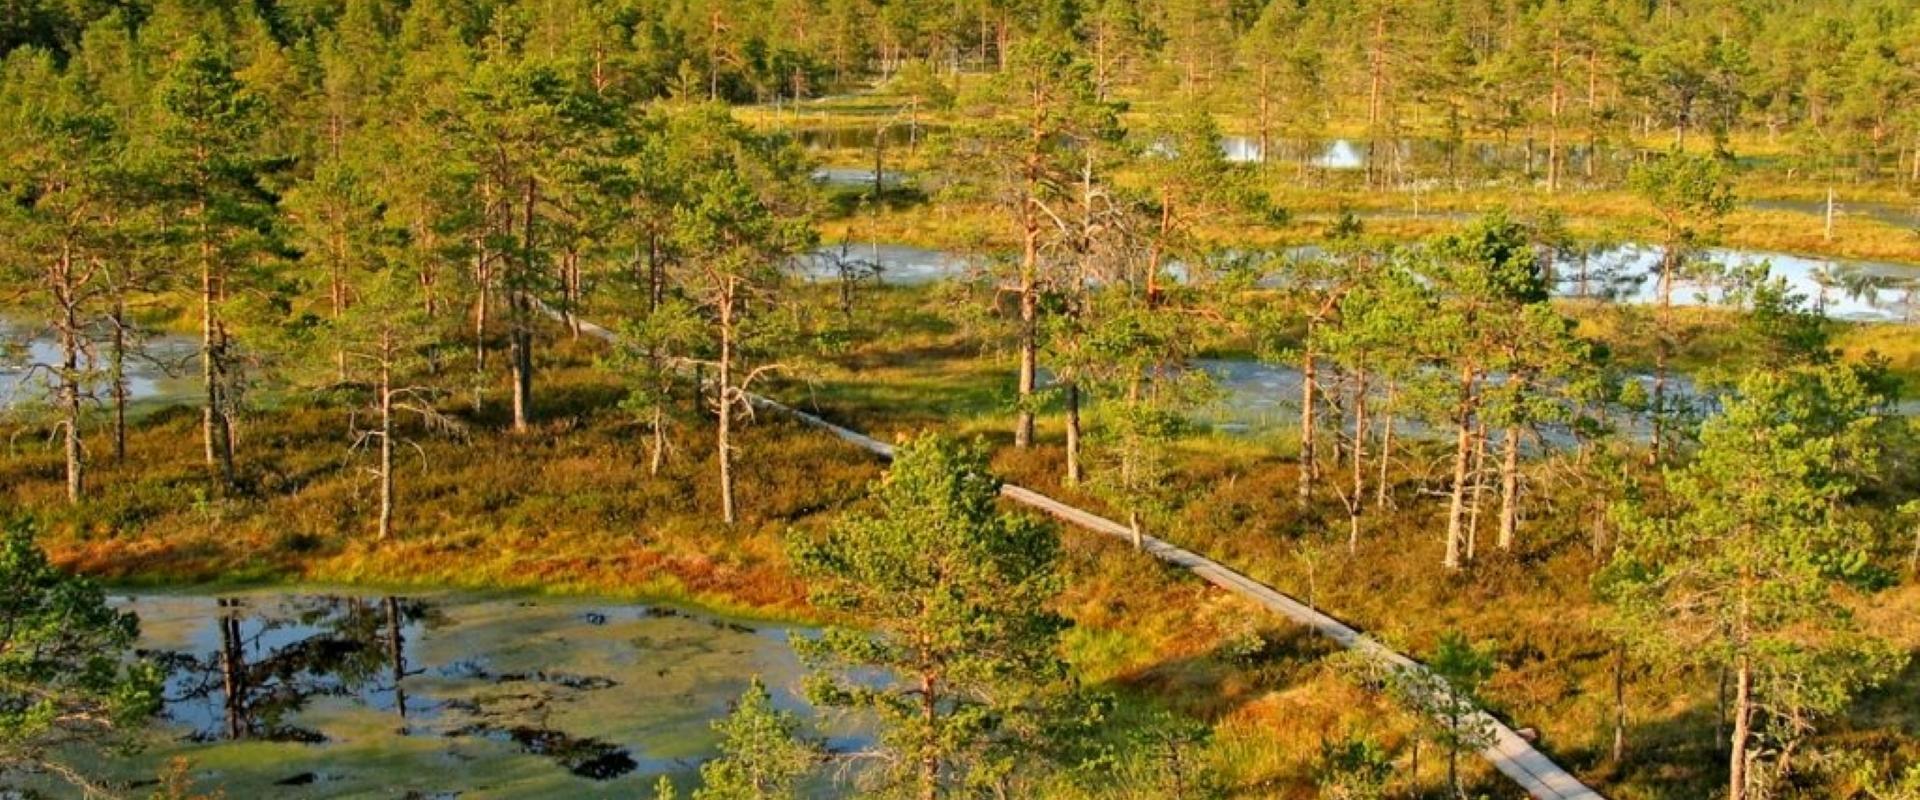 We start exploring Lahemaa National Park with a nice walk in charming Viru bog. The area has been made accessible with a specially constructed boardwa